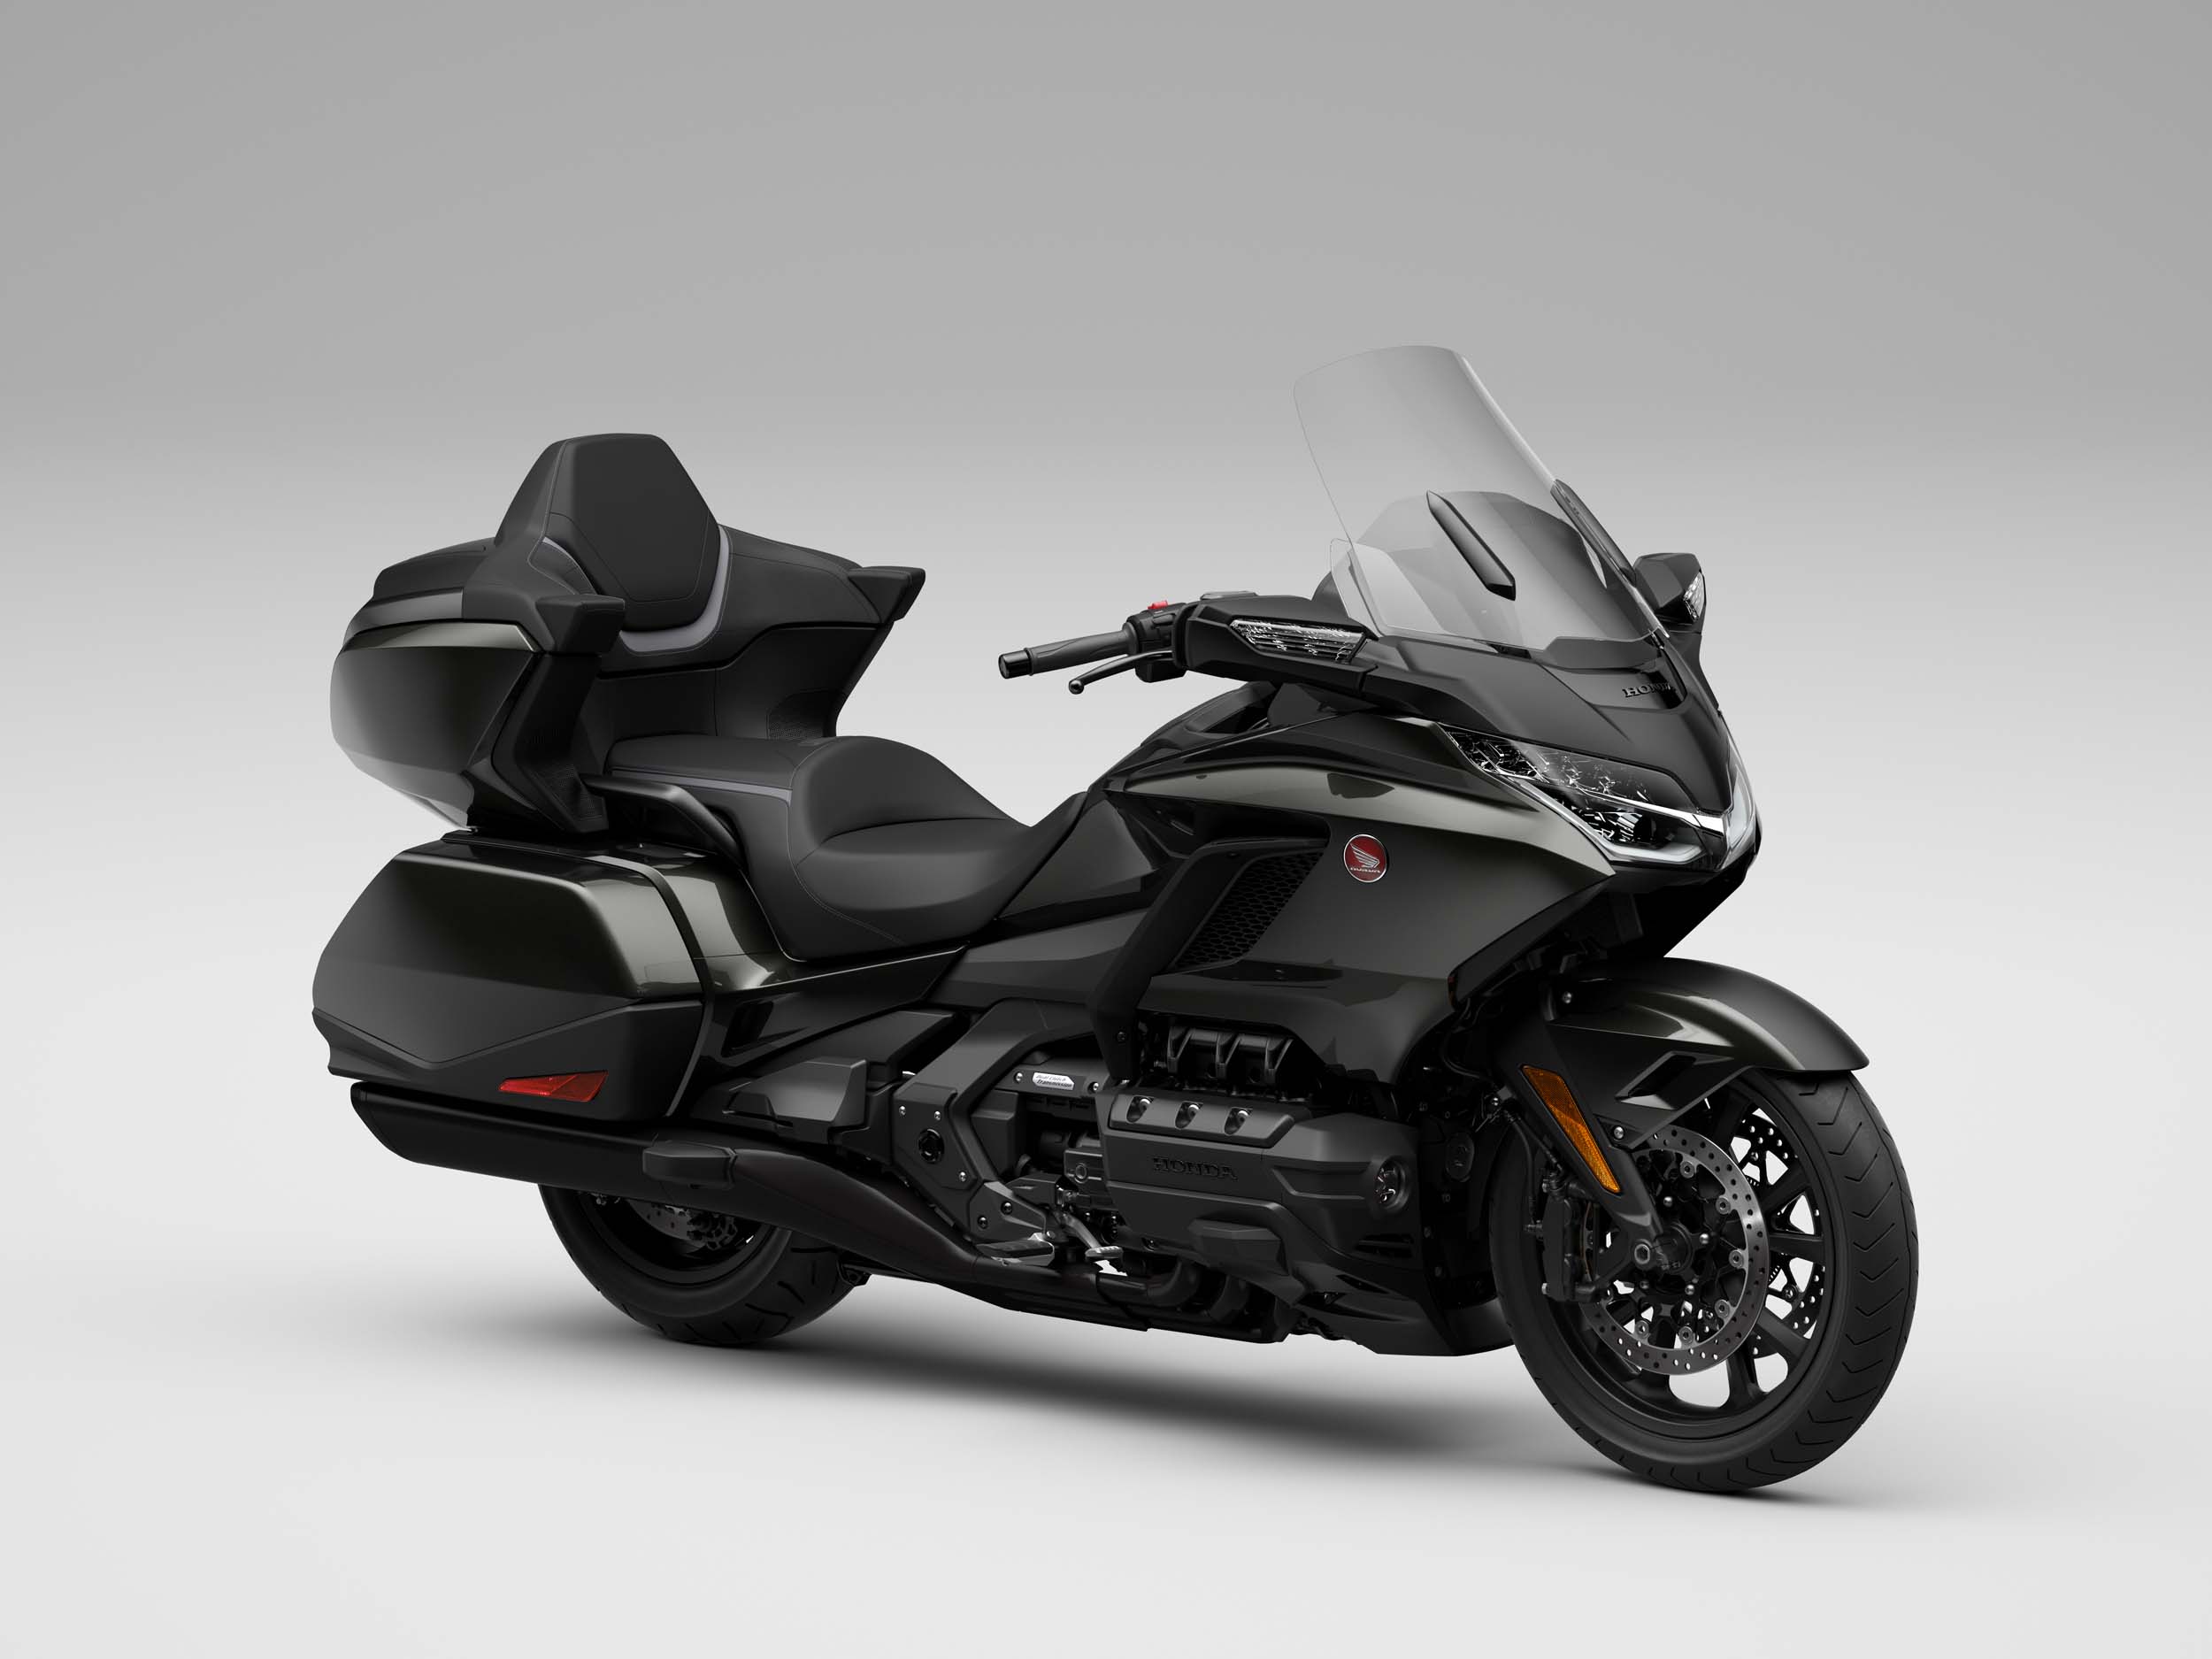 Honda Improves Touring Comfort, Convenience with 2021 Gold Wing We